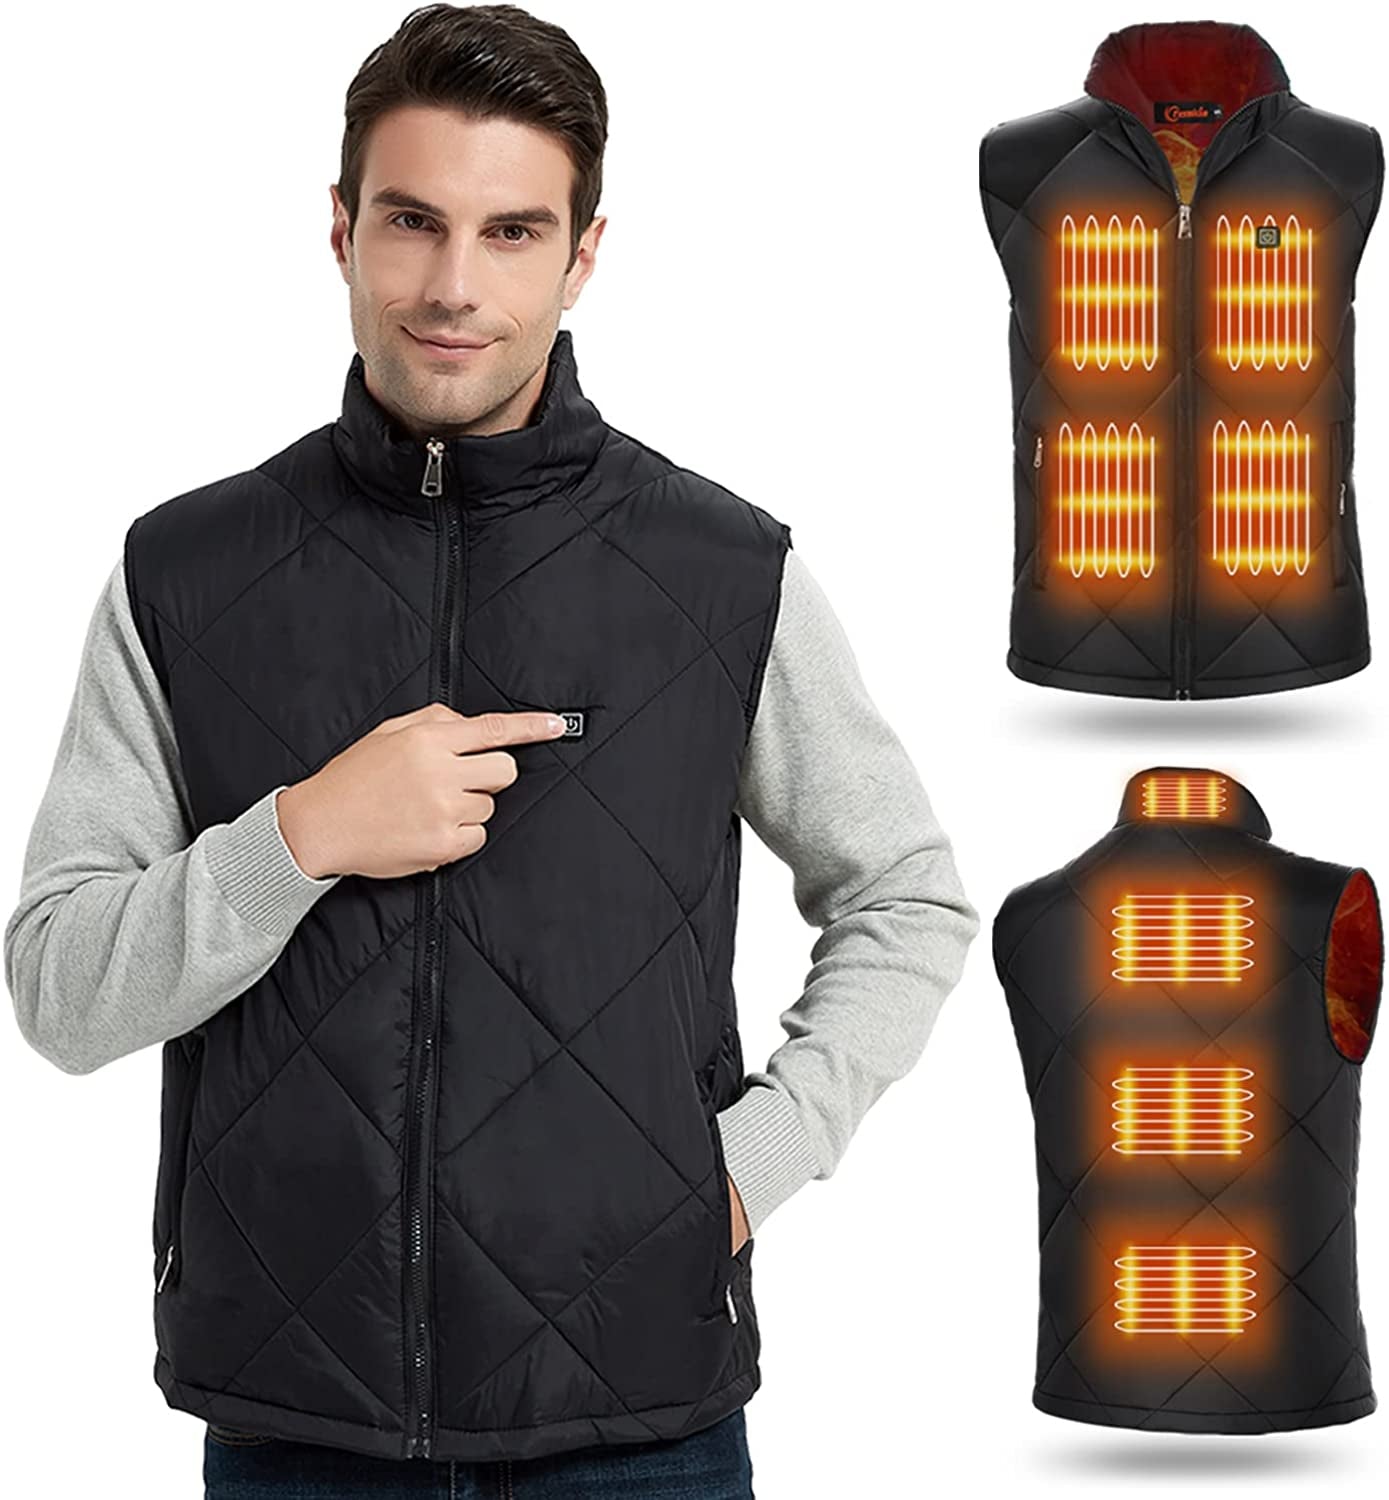 Winter USB Charging Heated Vest for Men and Women – 8 Heated Zones